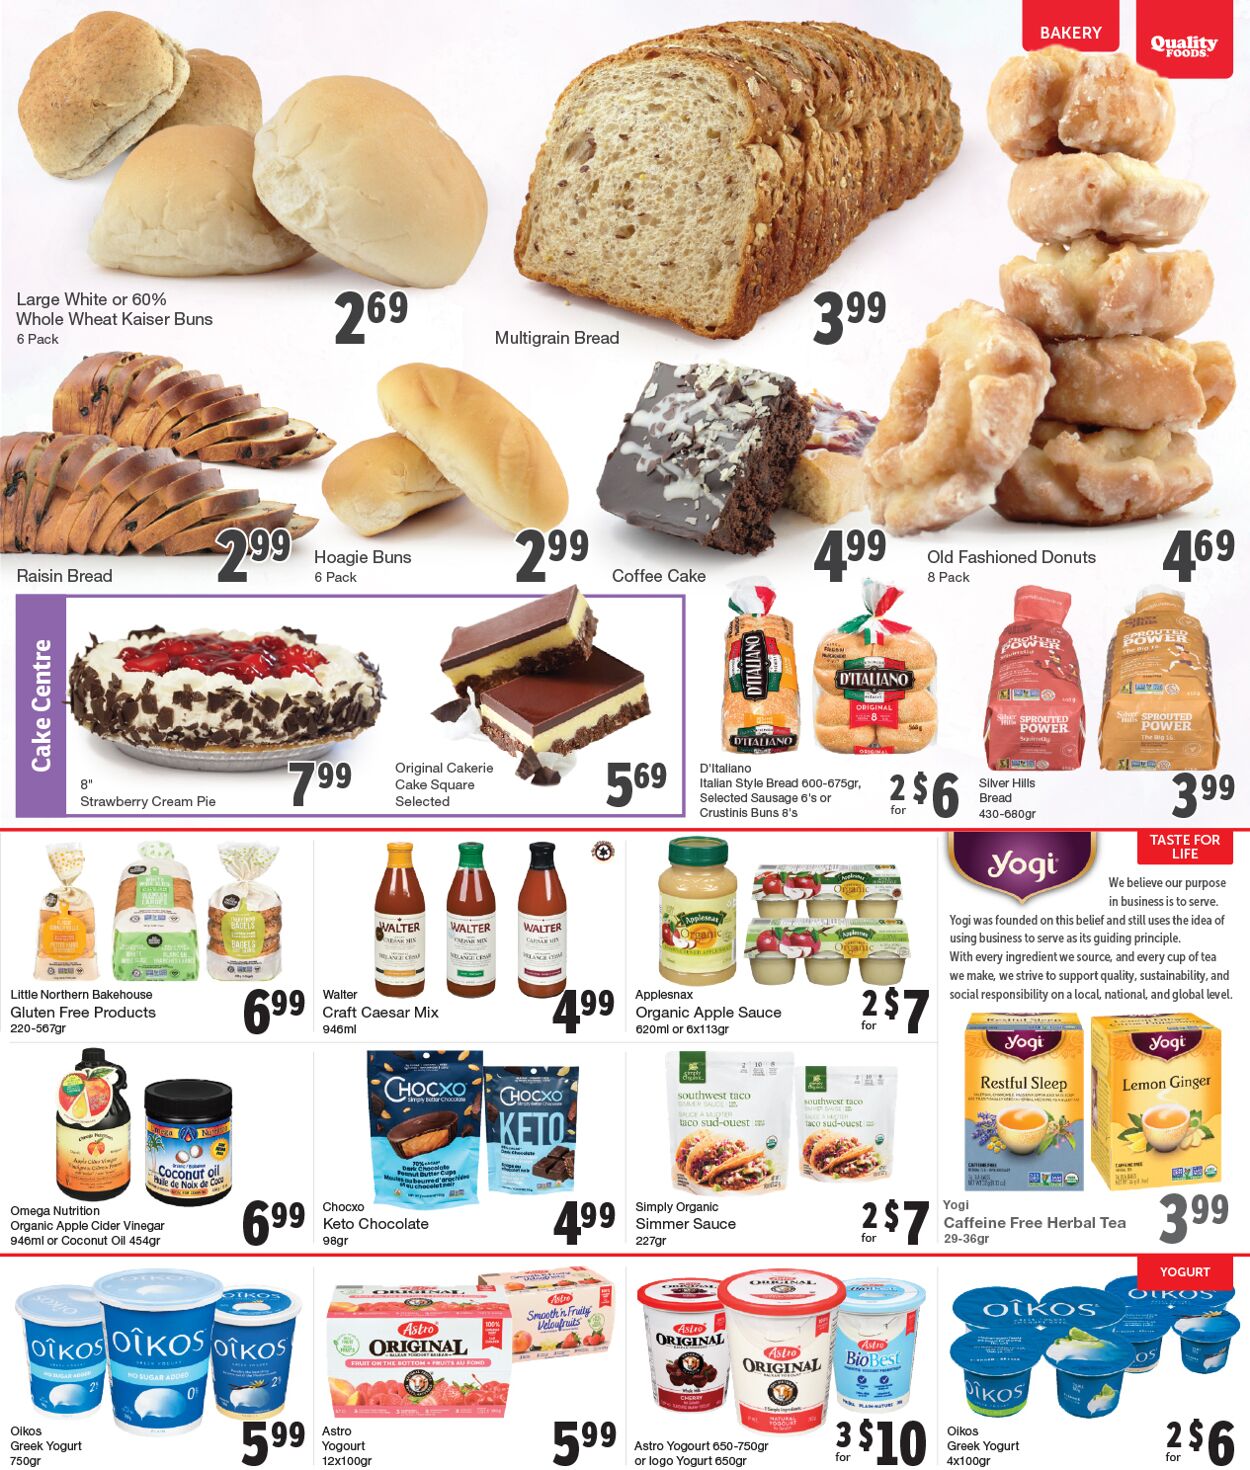 Flyer Quality Foods 04.07.2022 - 10.07.2022